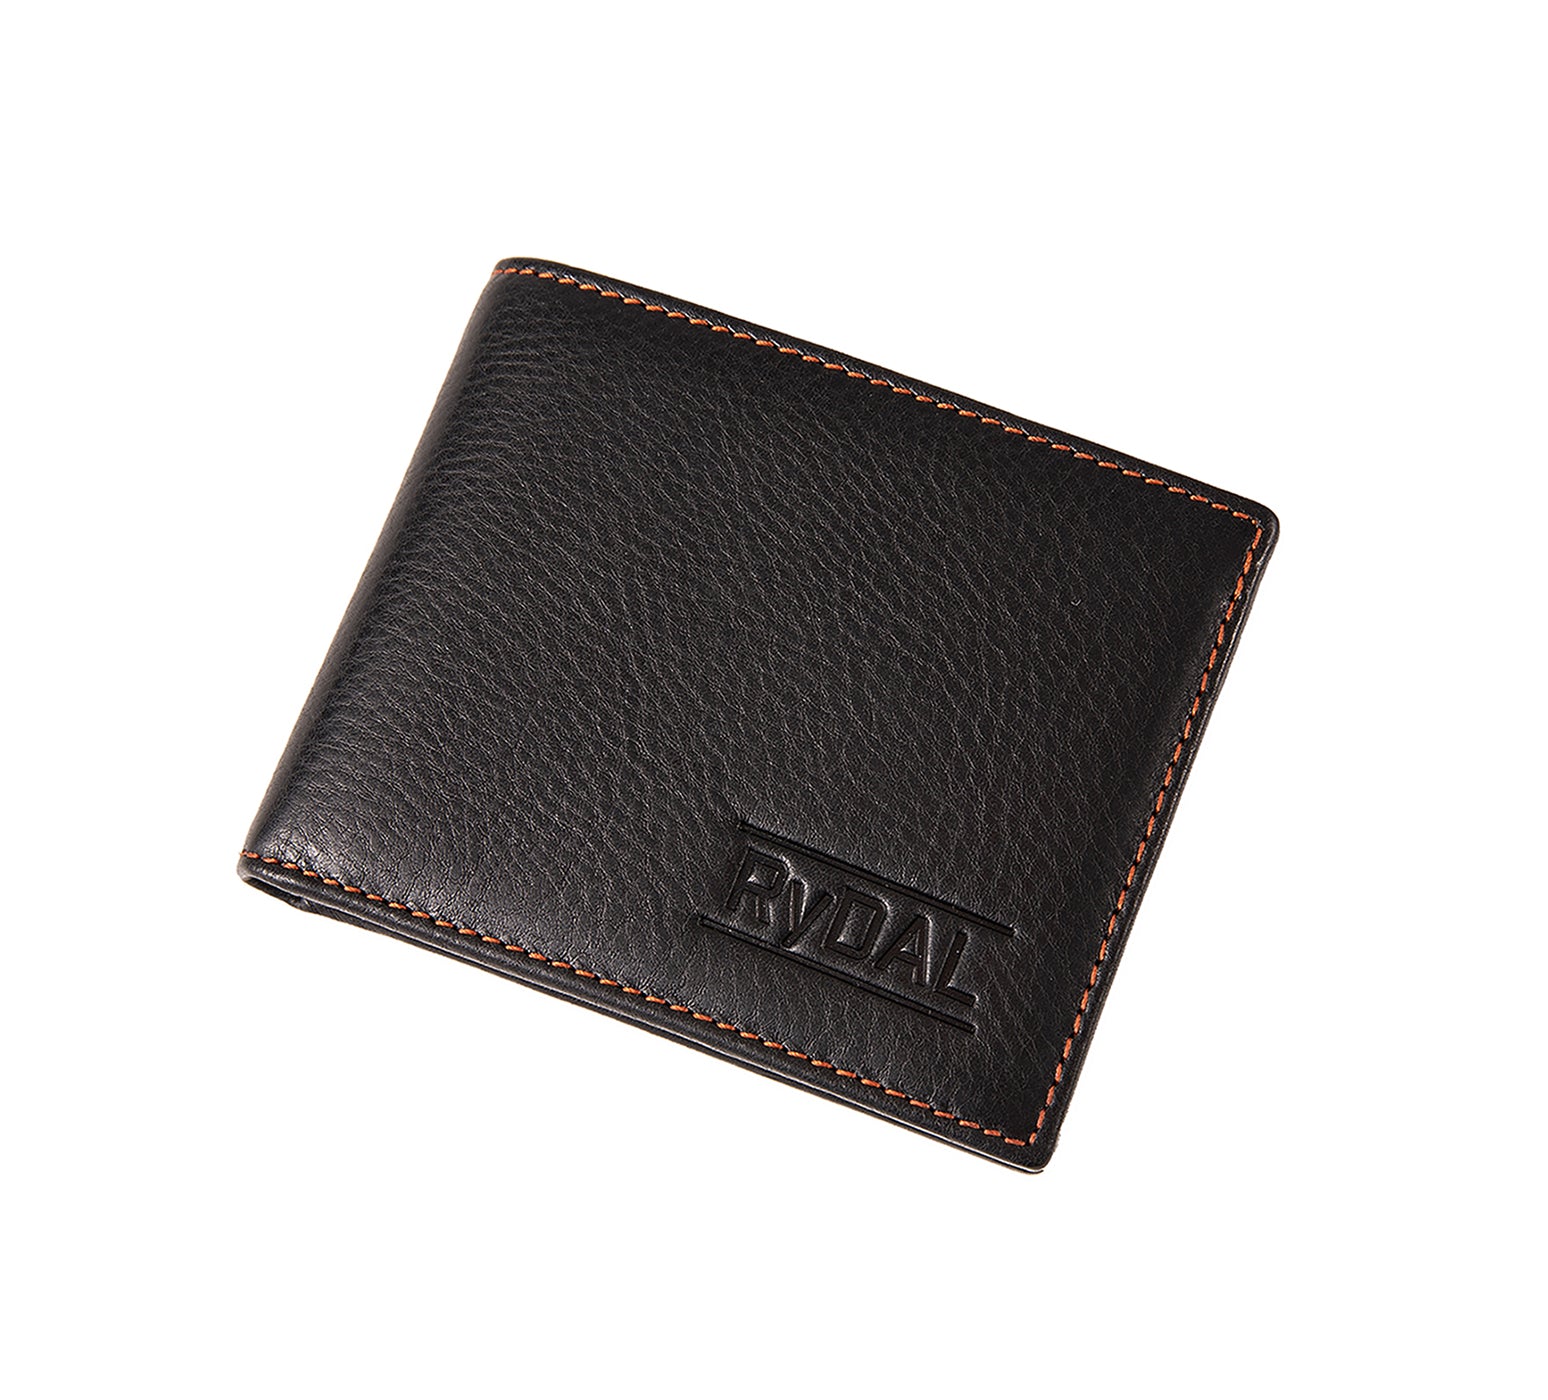 Mens Leather Wallet with Coin Pocket from Rydal in 'Black/Rust' showing wallet closed.